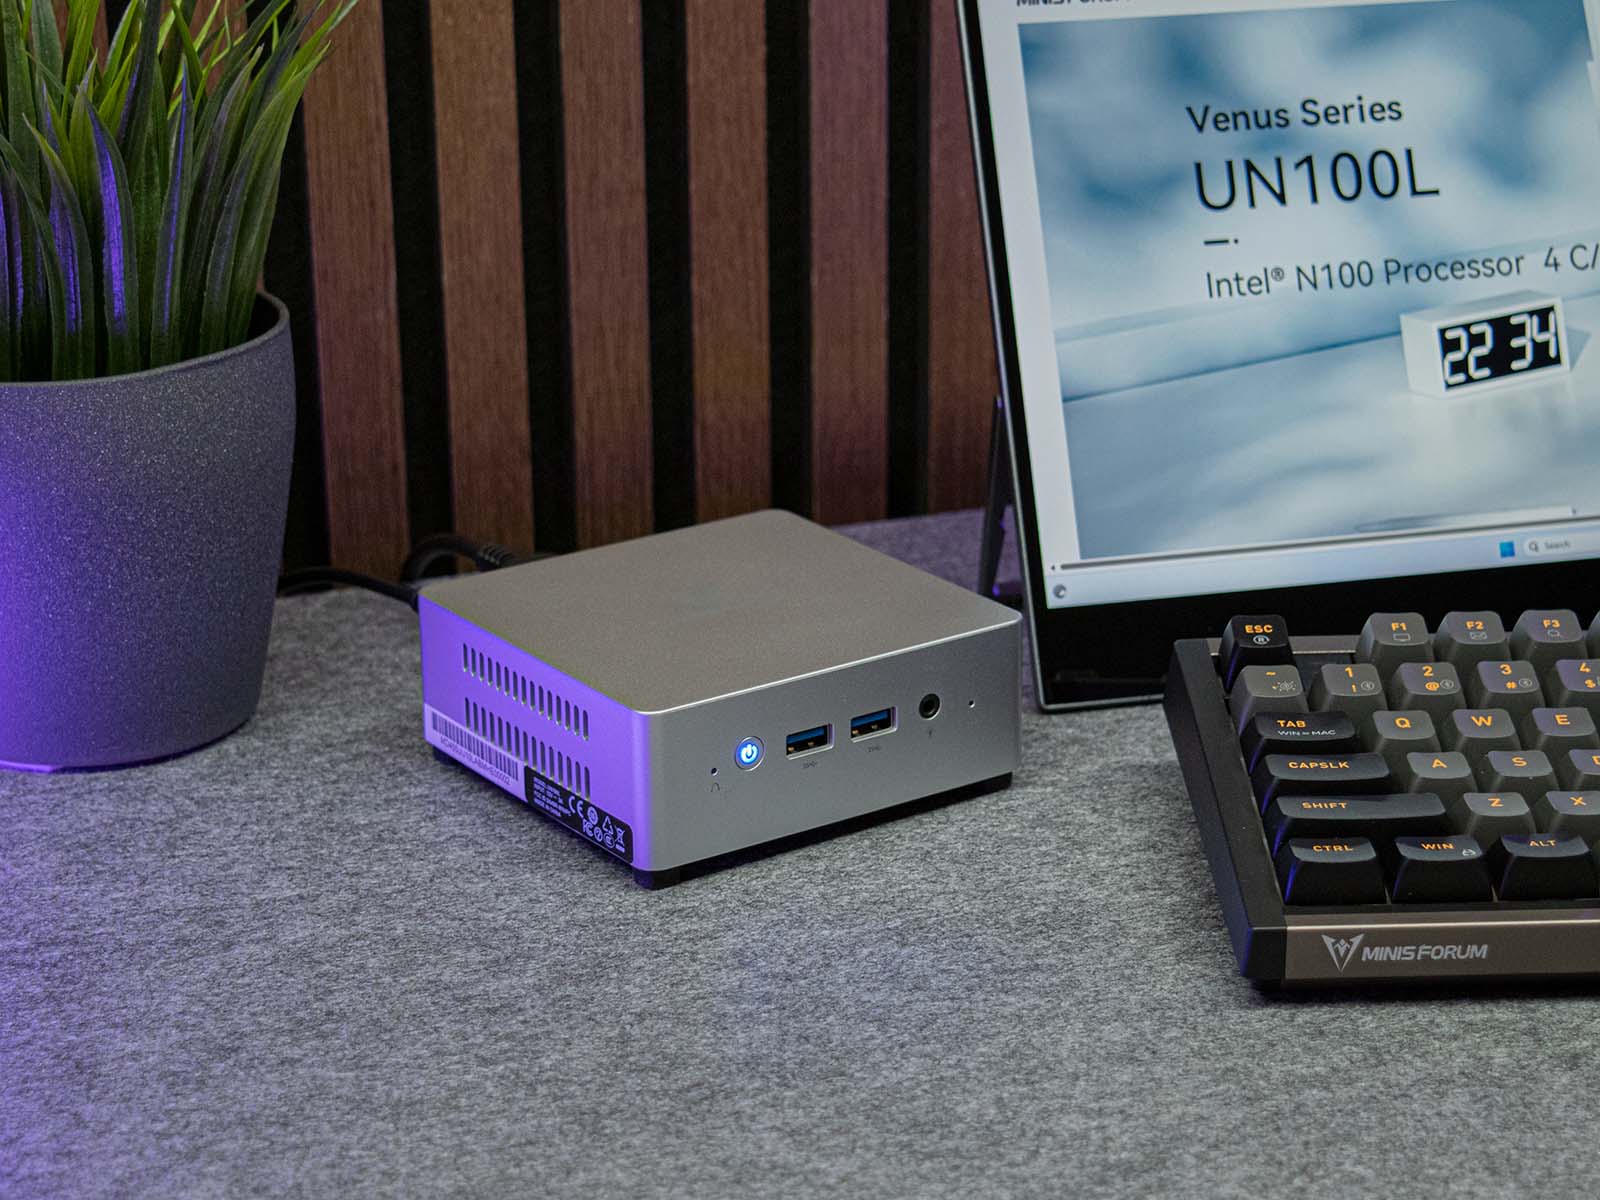 MINISFORUM UN305 And UN100 Ultra-compact PCs Launched With Alder Lake-N and  USB PD Support 